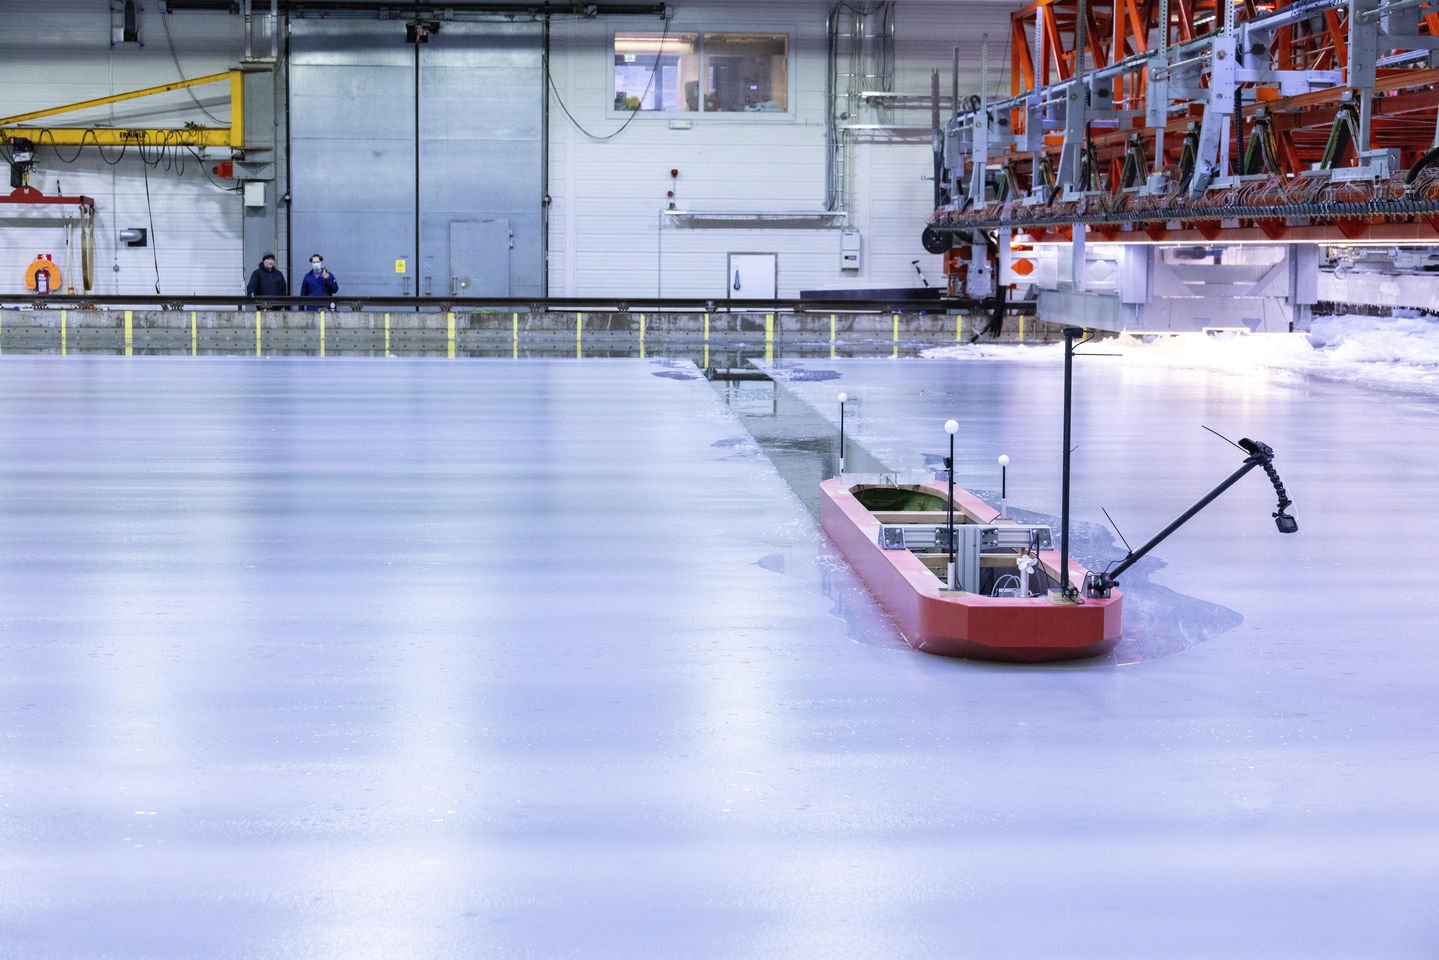 A model ship breaks through the ice in the Ice and Wave Tank. Photo credit: Mikko Raskinen